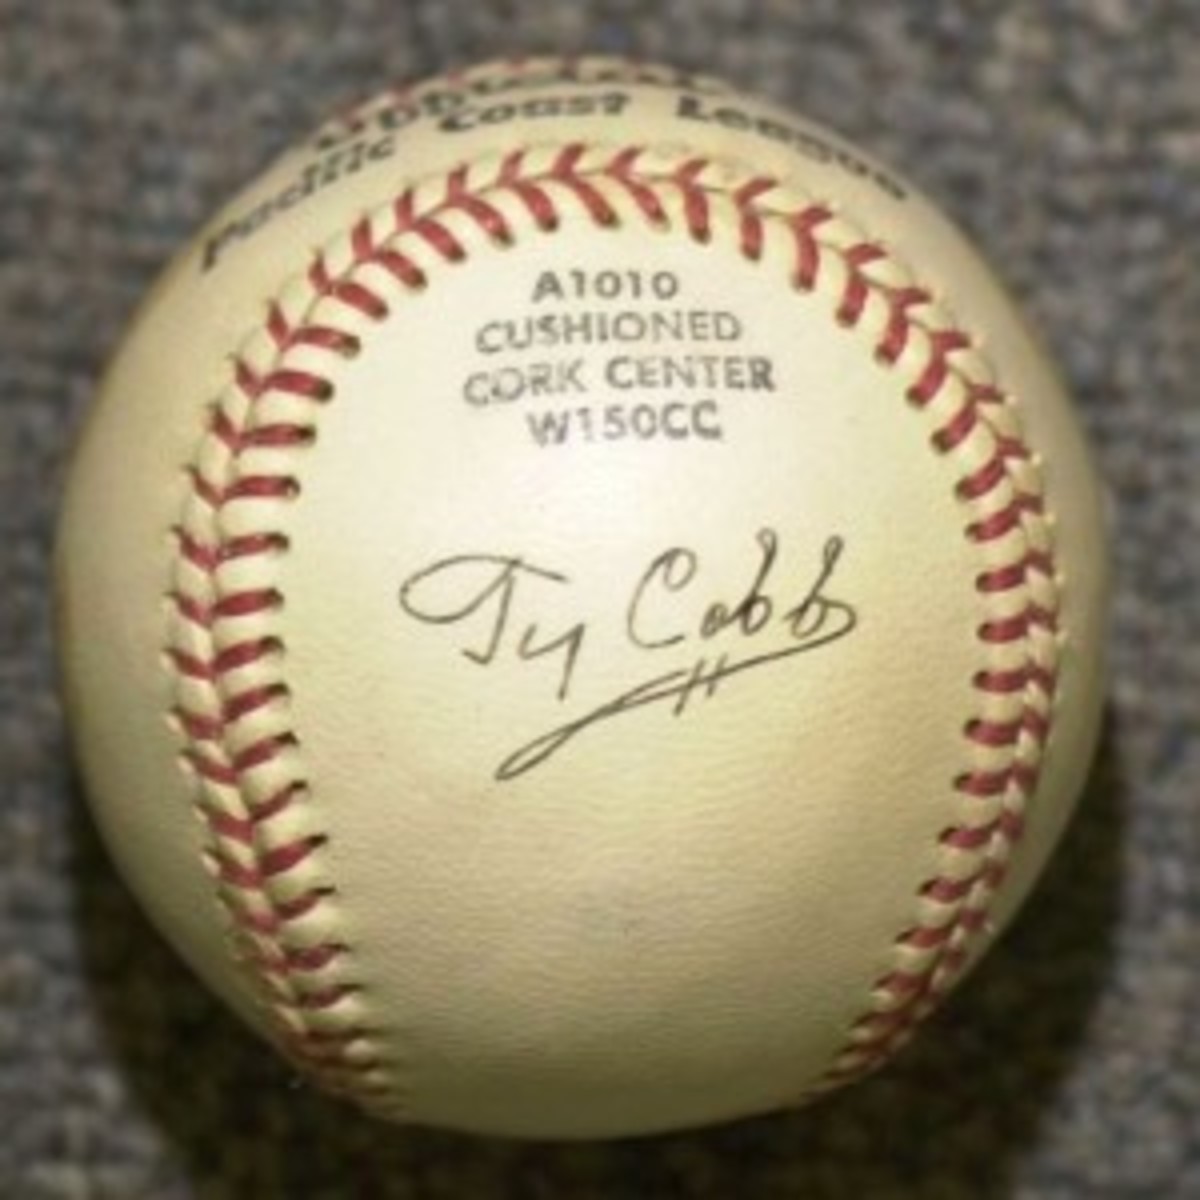 This forgery of Ty Cobb appeared on an old Pacific Coast League baseball.